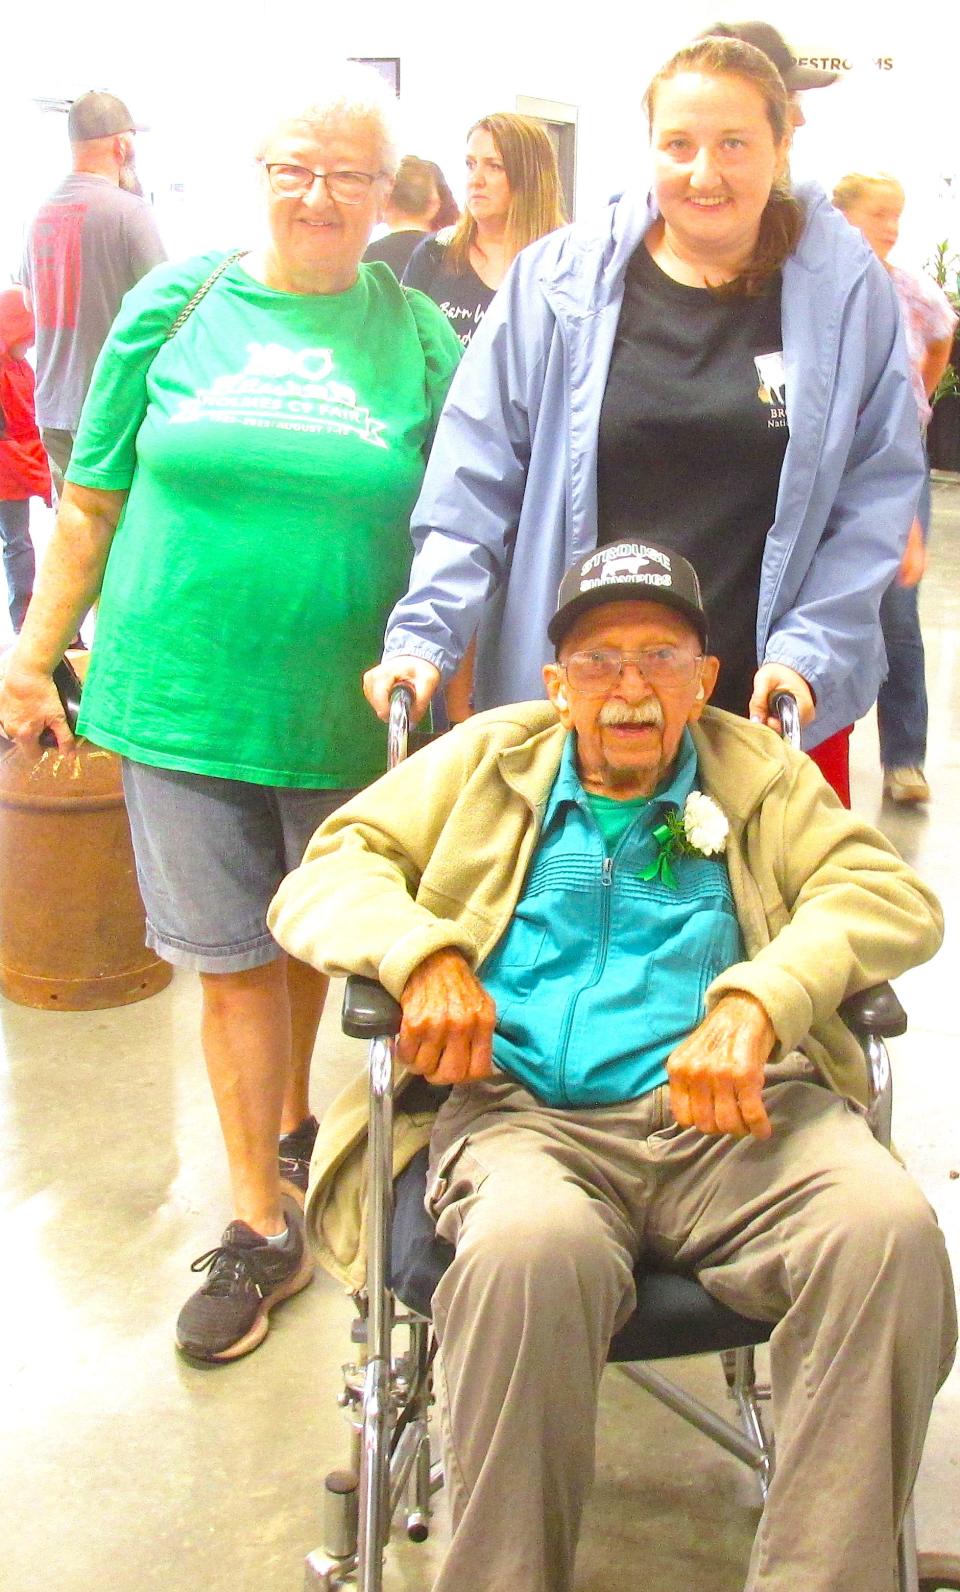 Jerry Strouse, 91, has been to a majority of the 100 Holmes County Fairs. He was recognized at the anniversary celebration Monday at the Expo Center at Harvest Ridge. His daughter Beth Crone and granddaughter Jill Hudson took Jerry for some ice cream at the fair.